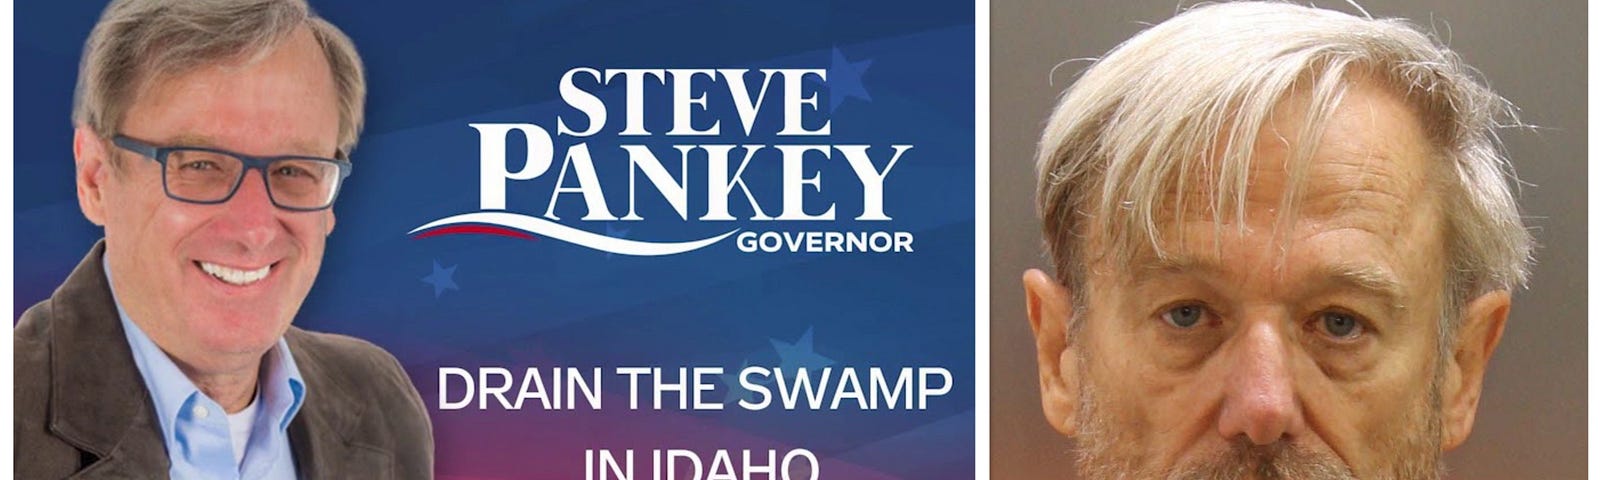 The Candidate for Governor Who Killed a Child: What’s Wrong With Steve Pankey? The dark psyche of Jonelle Matthews’ murderer